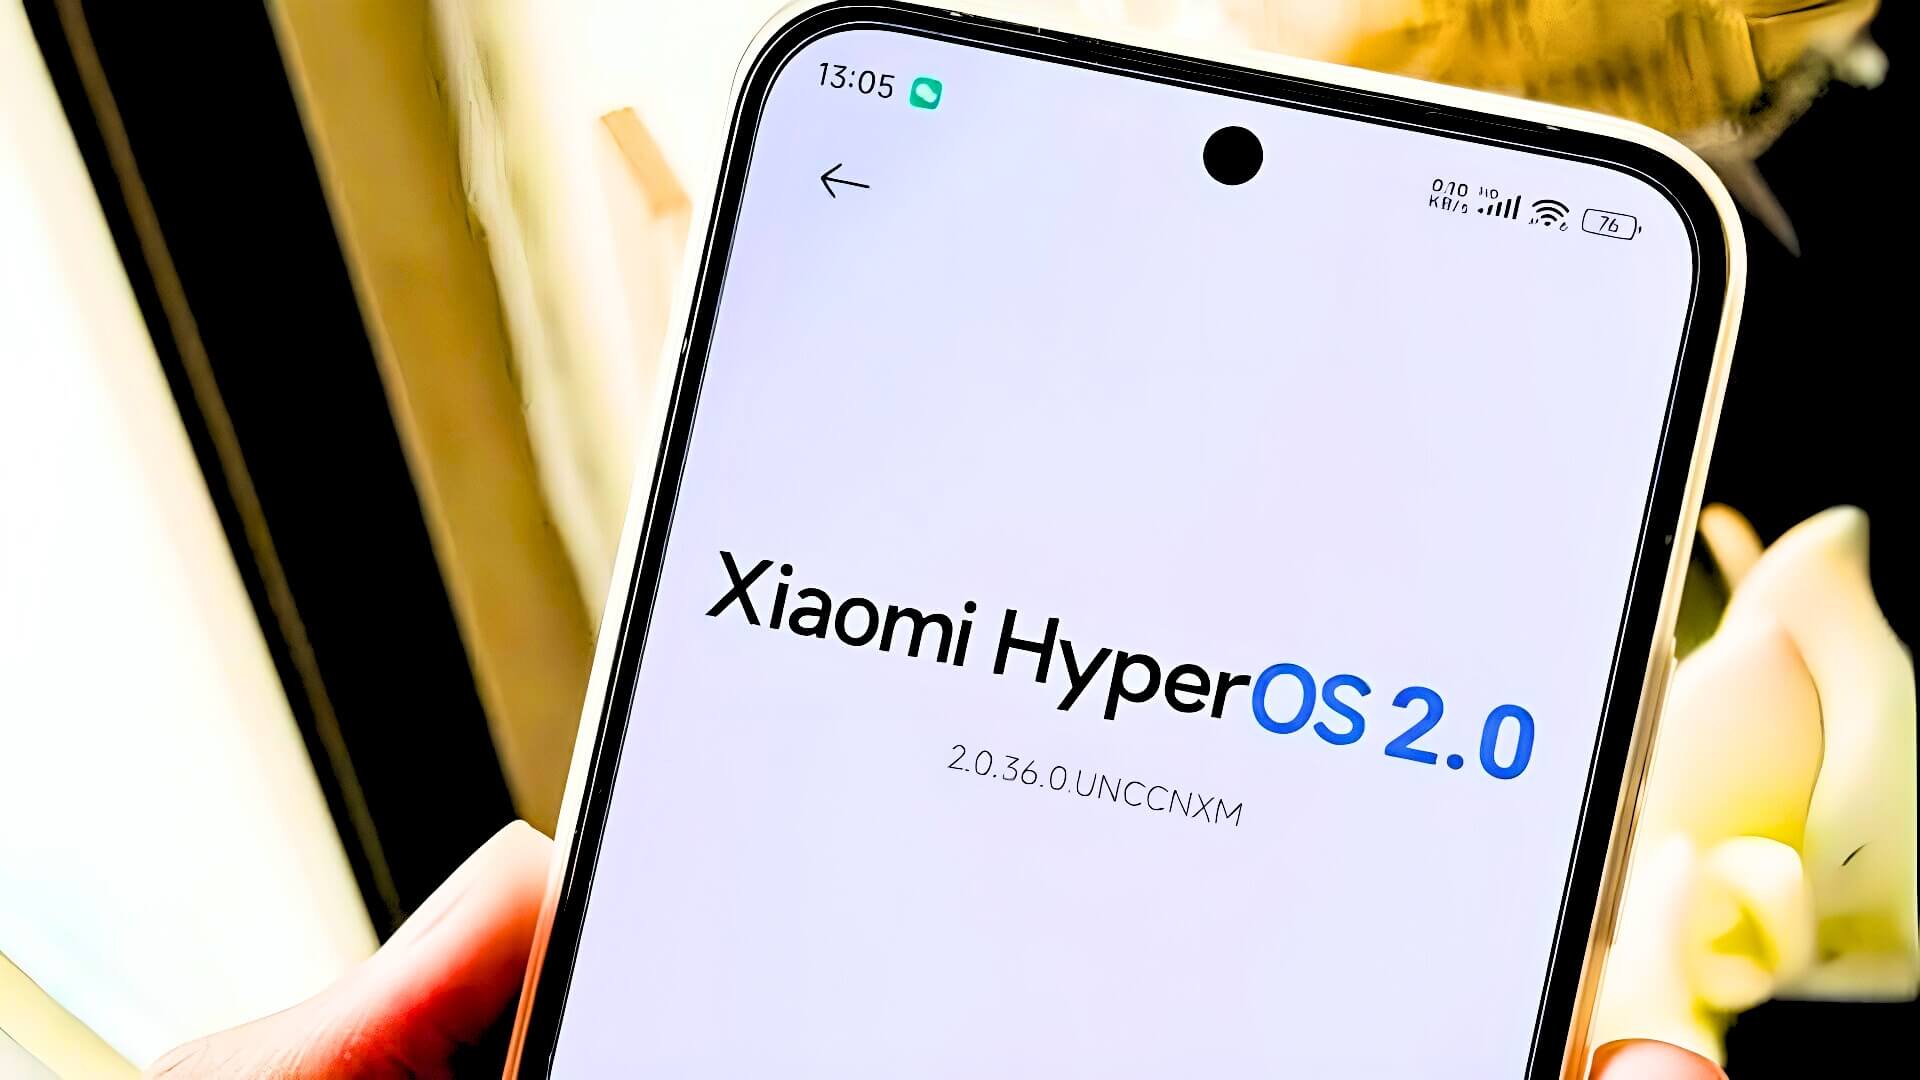 List of Ineligible Xiaomi Devices for HyperOS 2.0